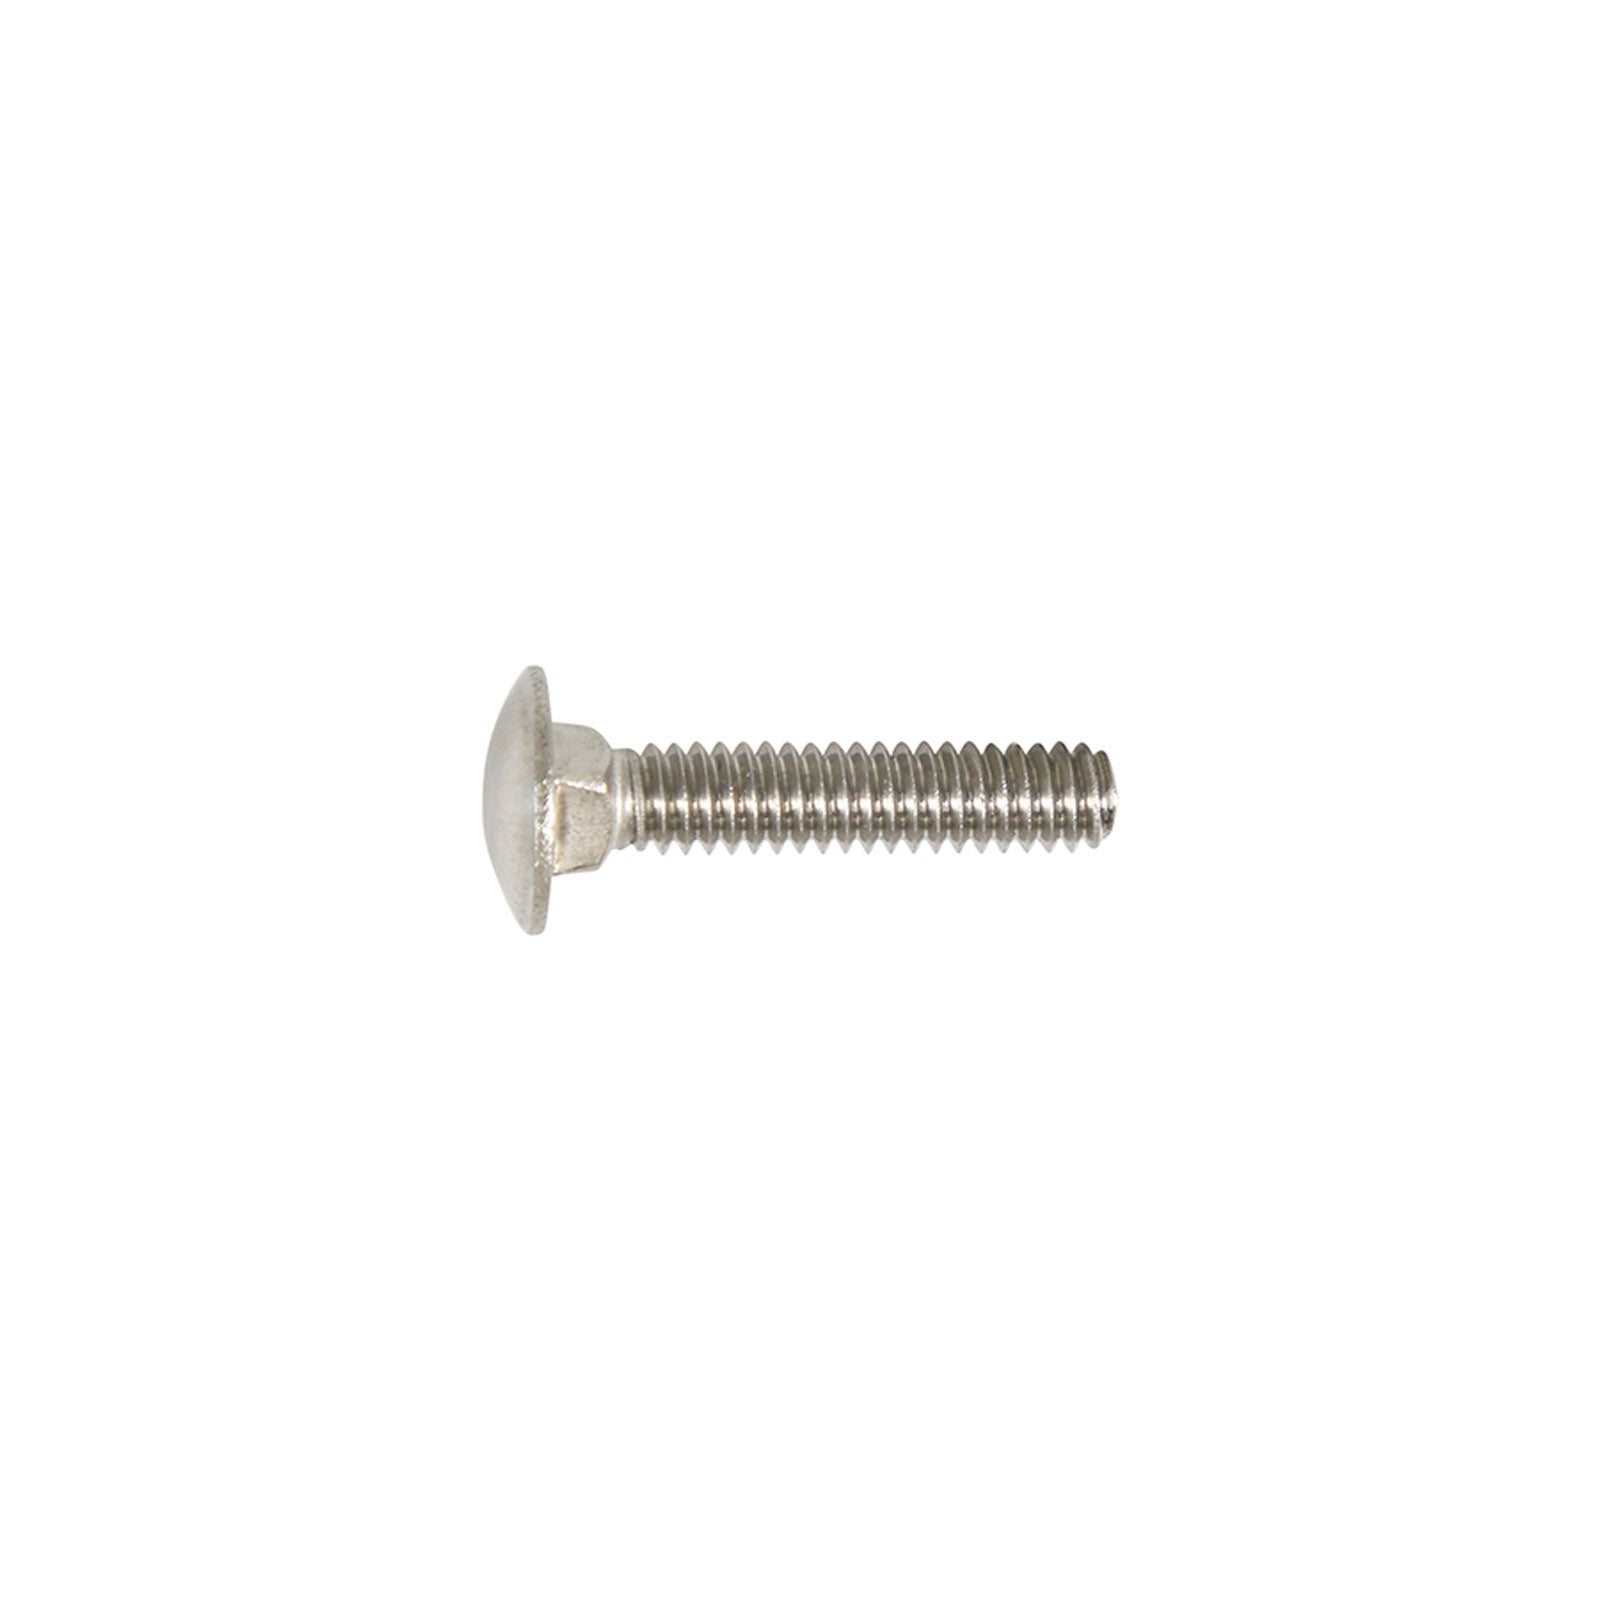 1/4-20 x 1-1/4 Conquest Carriage Bolt - 304 Stainless Steel